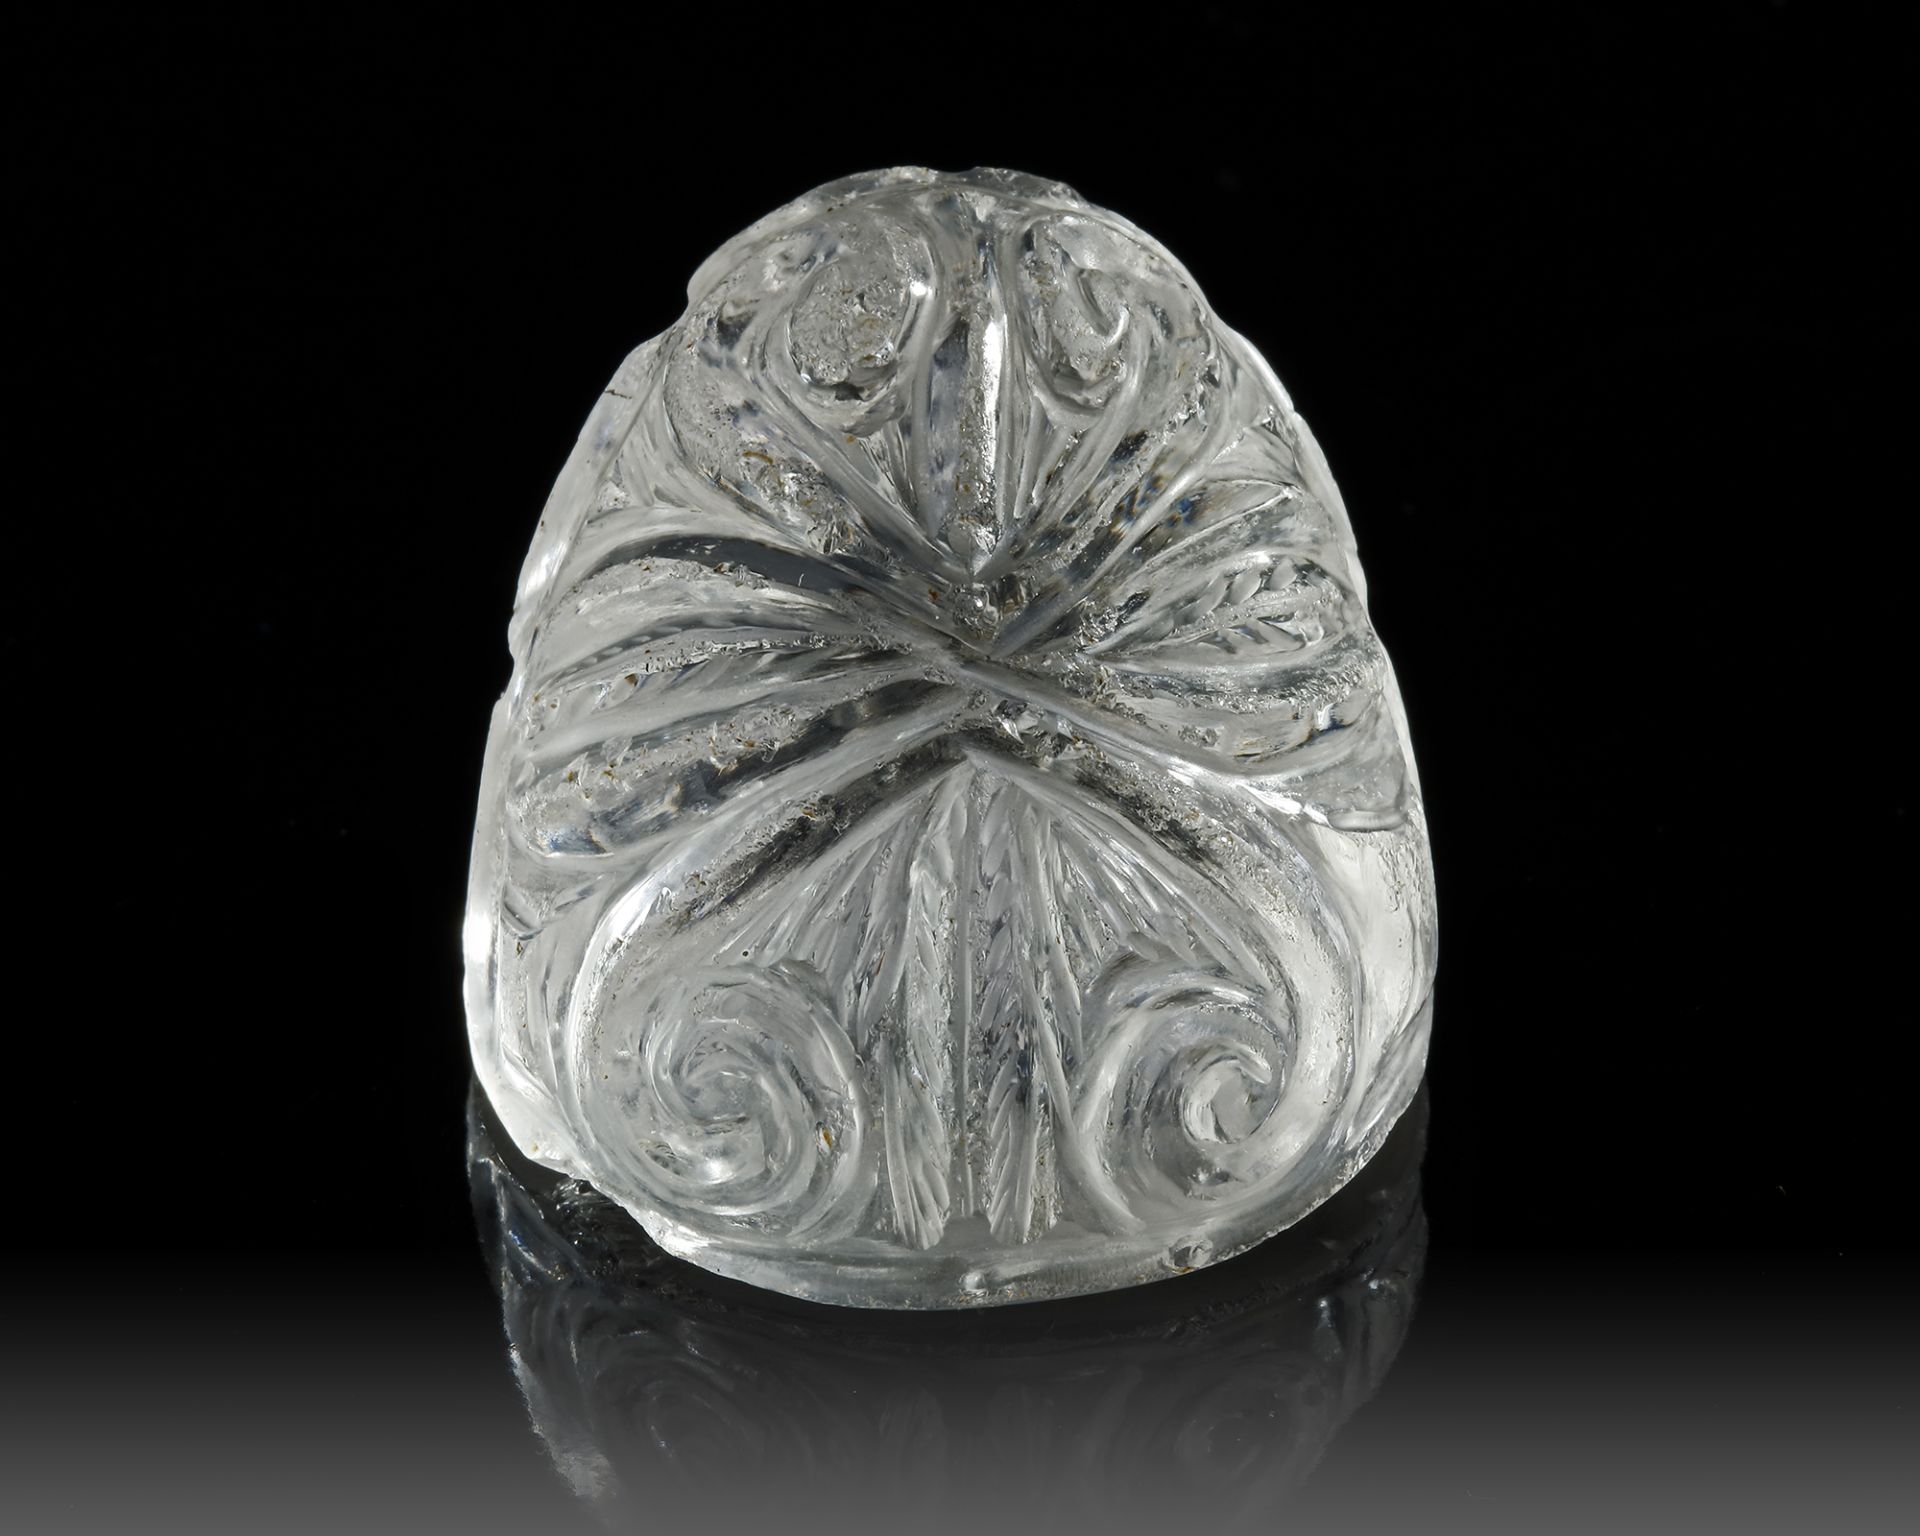 A FATIMID ROCK CRYSTAL CHESS PIECE, EGYPT, 11TH CENTURY - Image 4 of 6